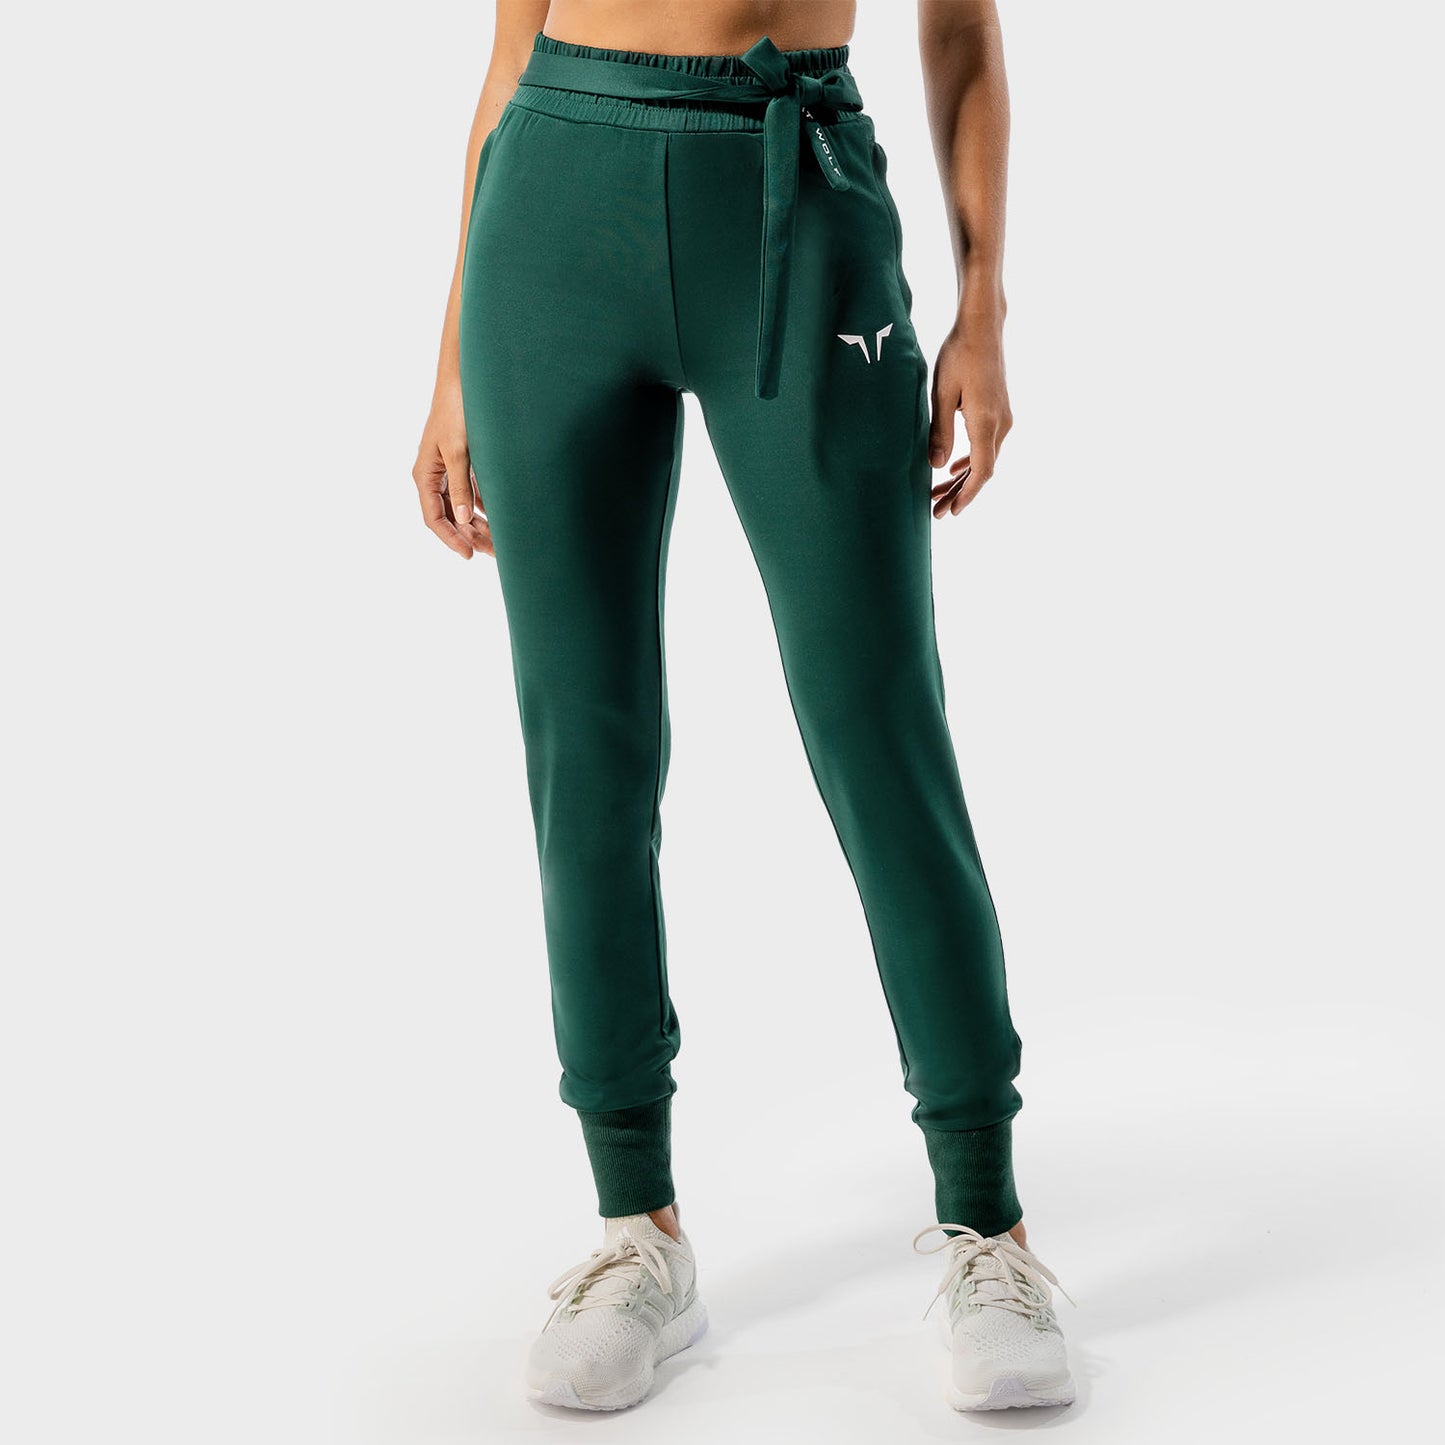 squatwolf-gym-pants-for-women-she-wolf-do-knot-joggers-bottle-green-workout-clothes